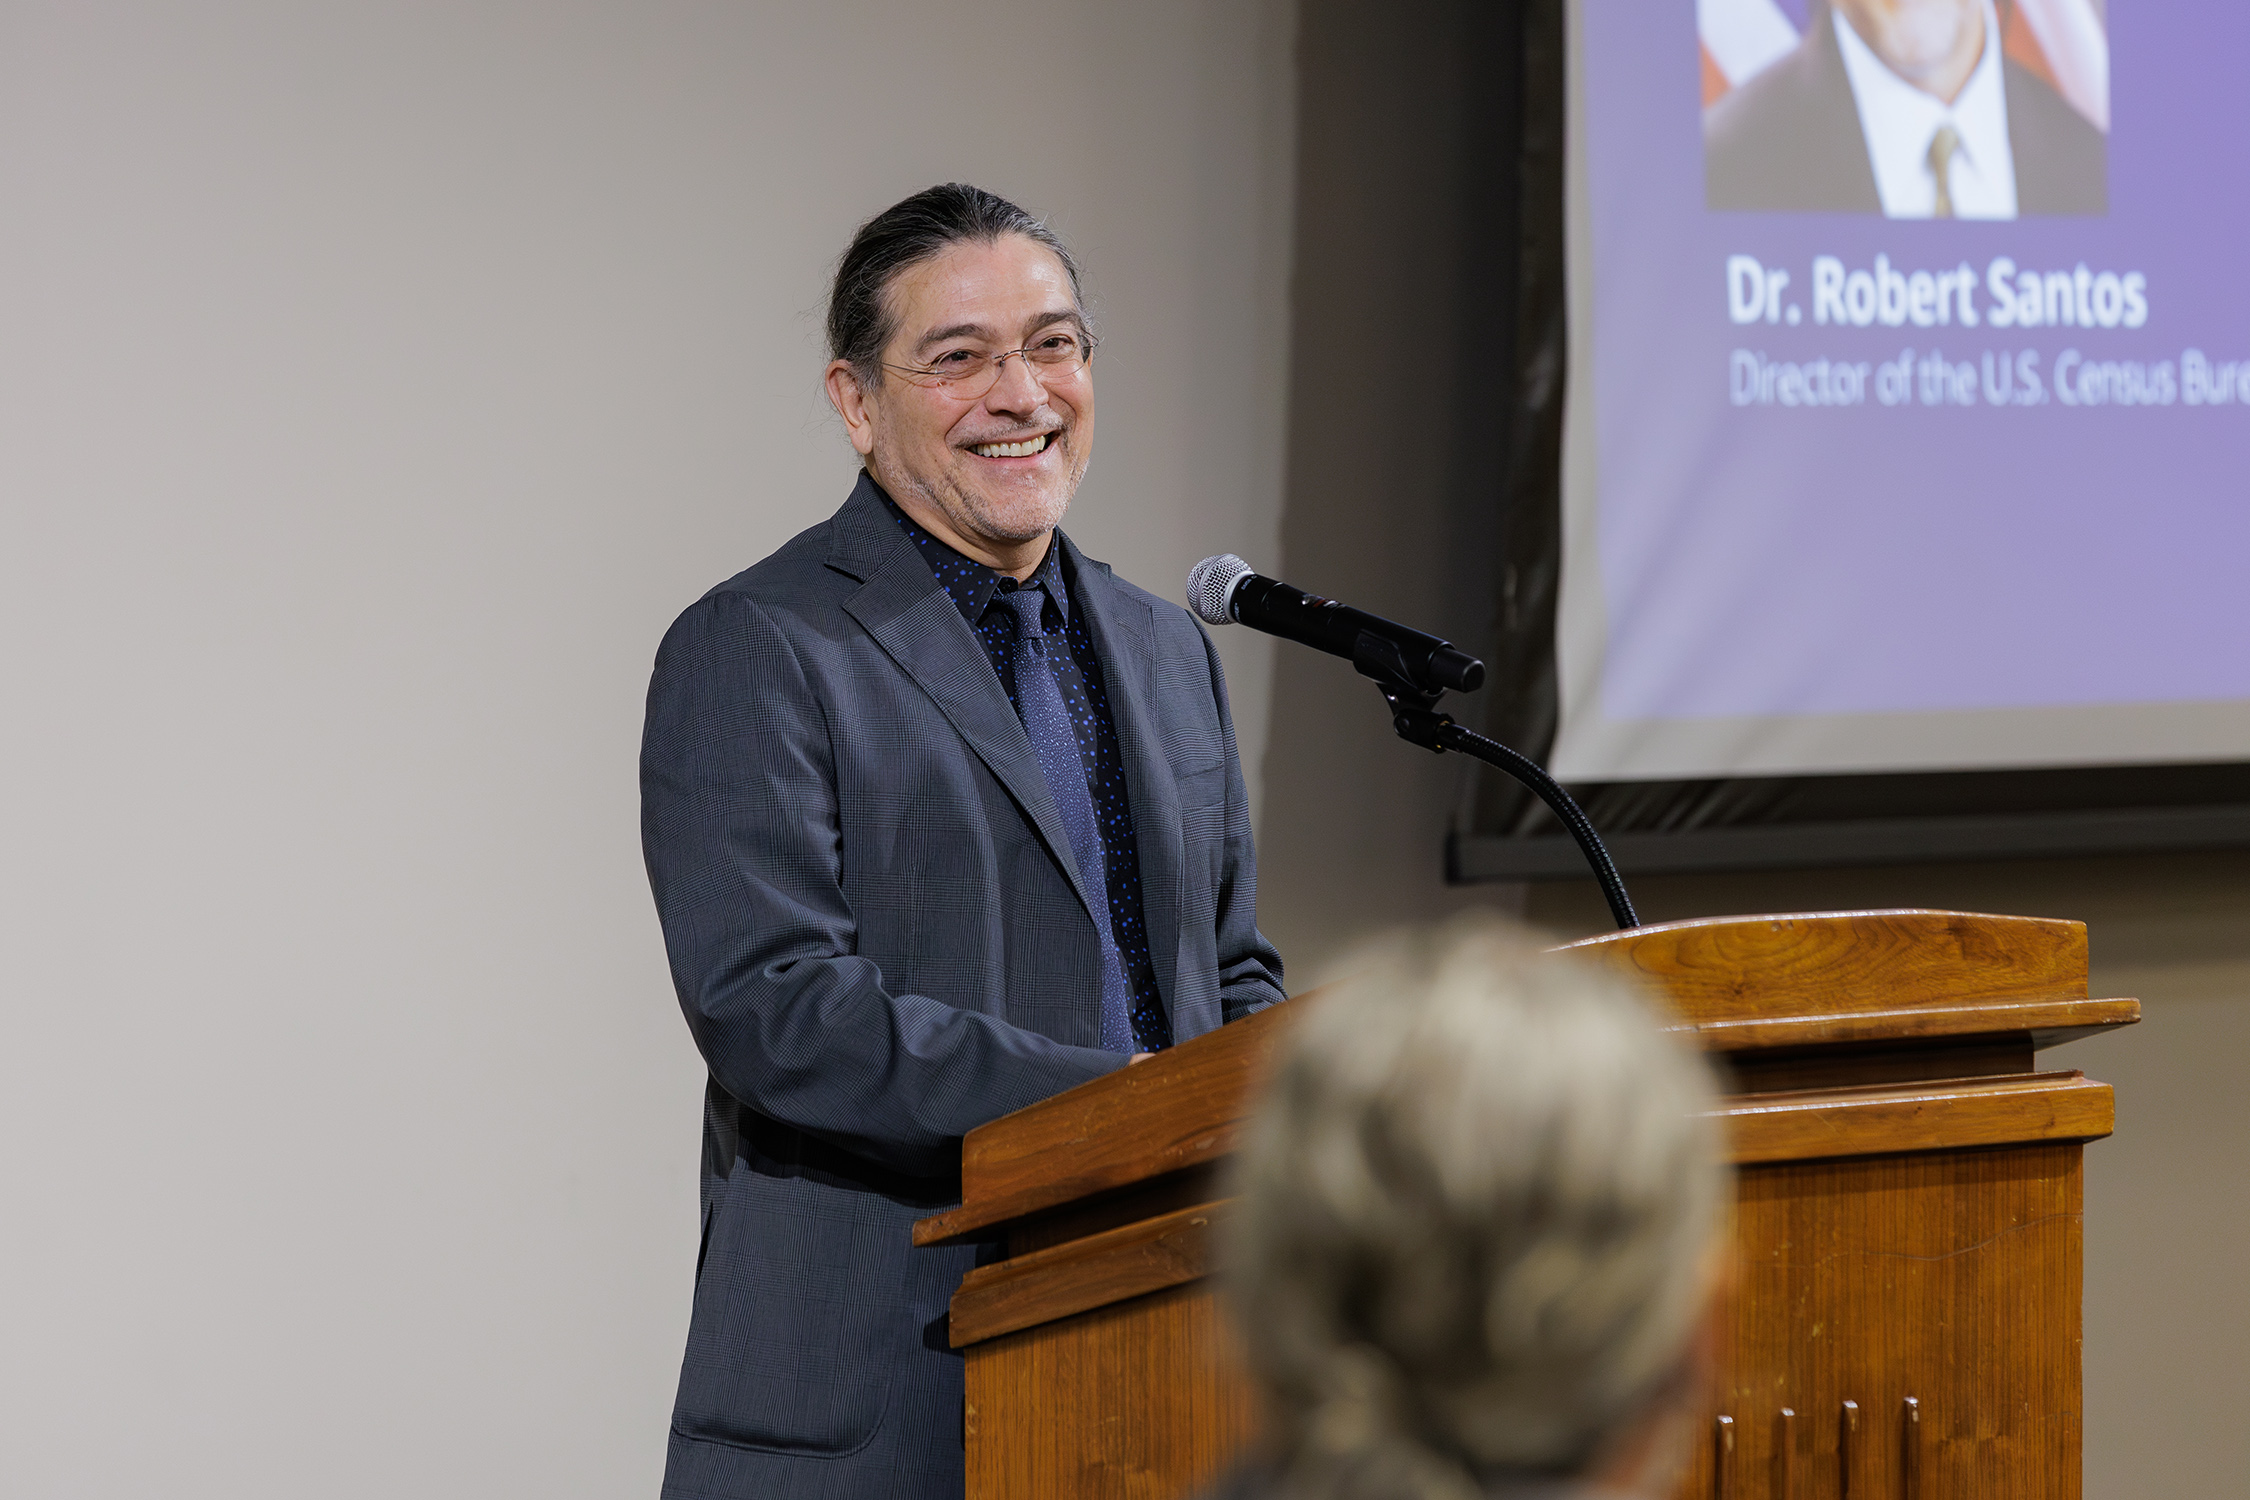 U.S. Census Bureau Director Robert Santos speaks to an audience in the Memorial Student Center on the Texas A&M University campus